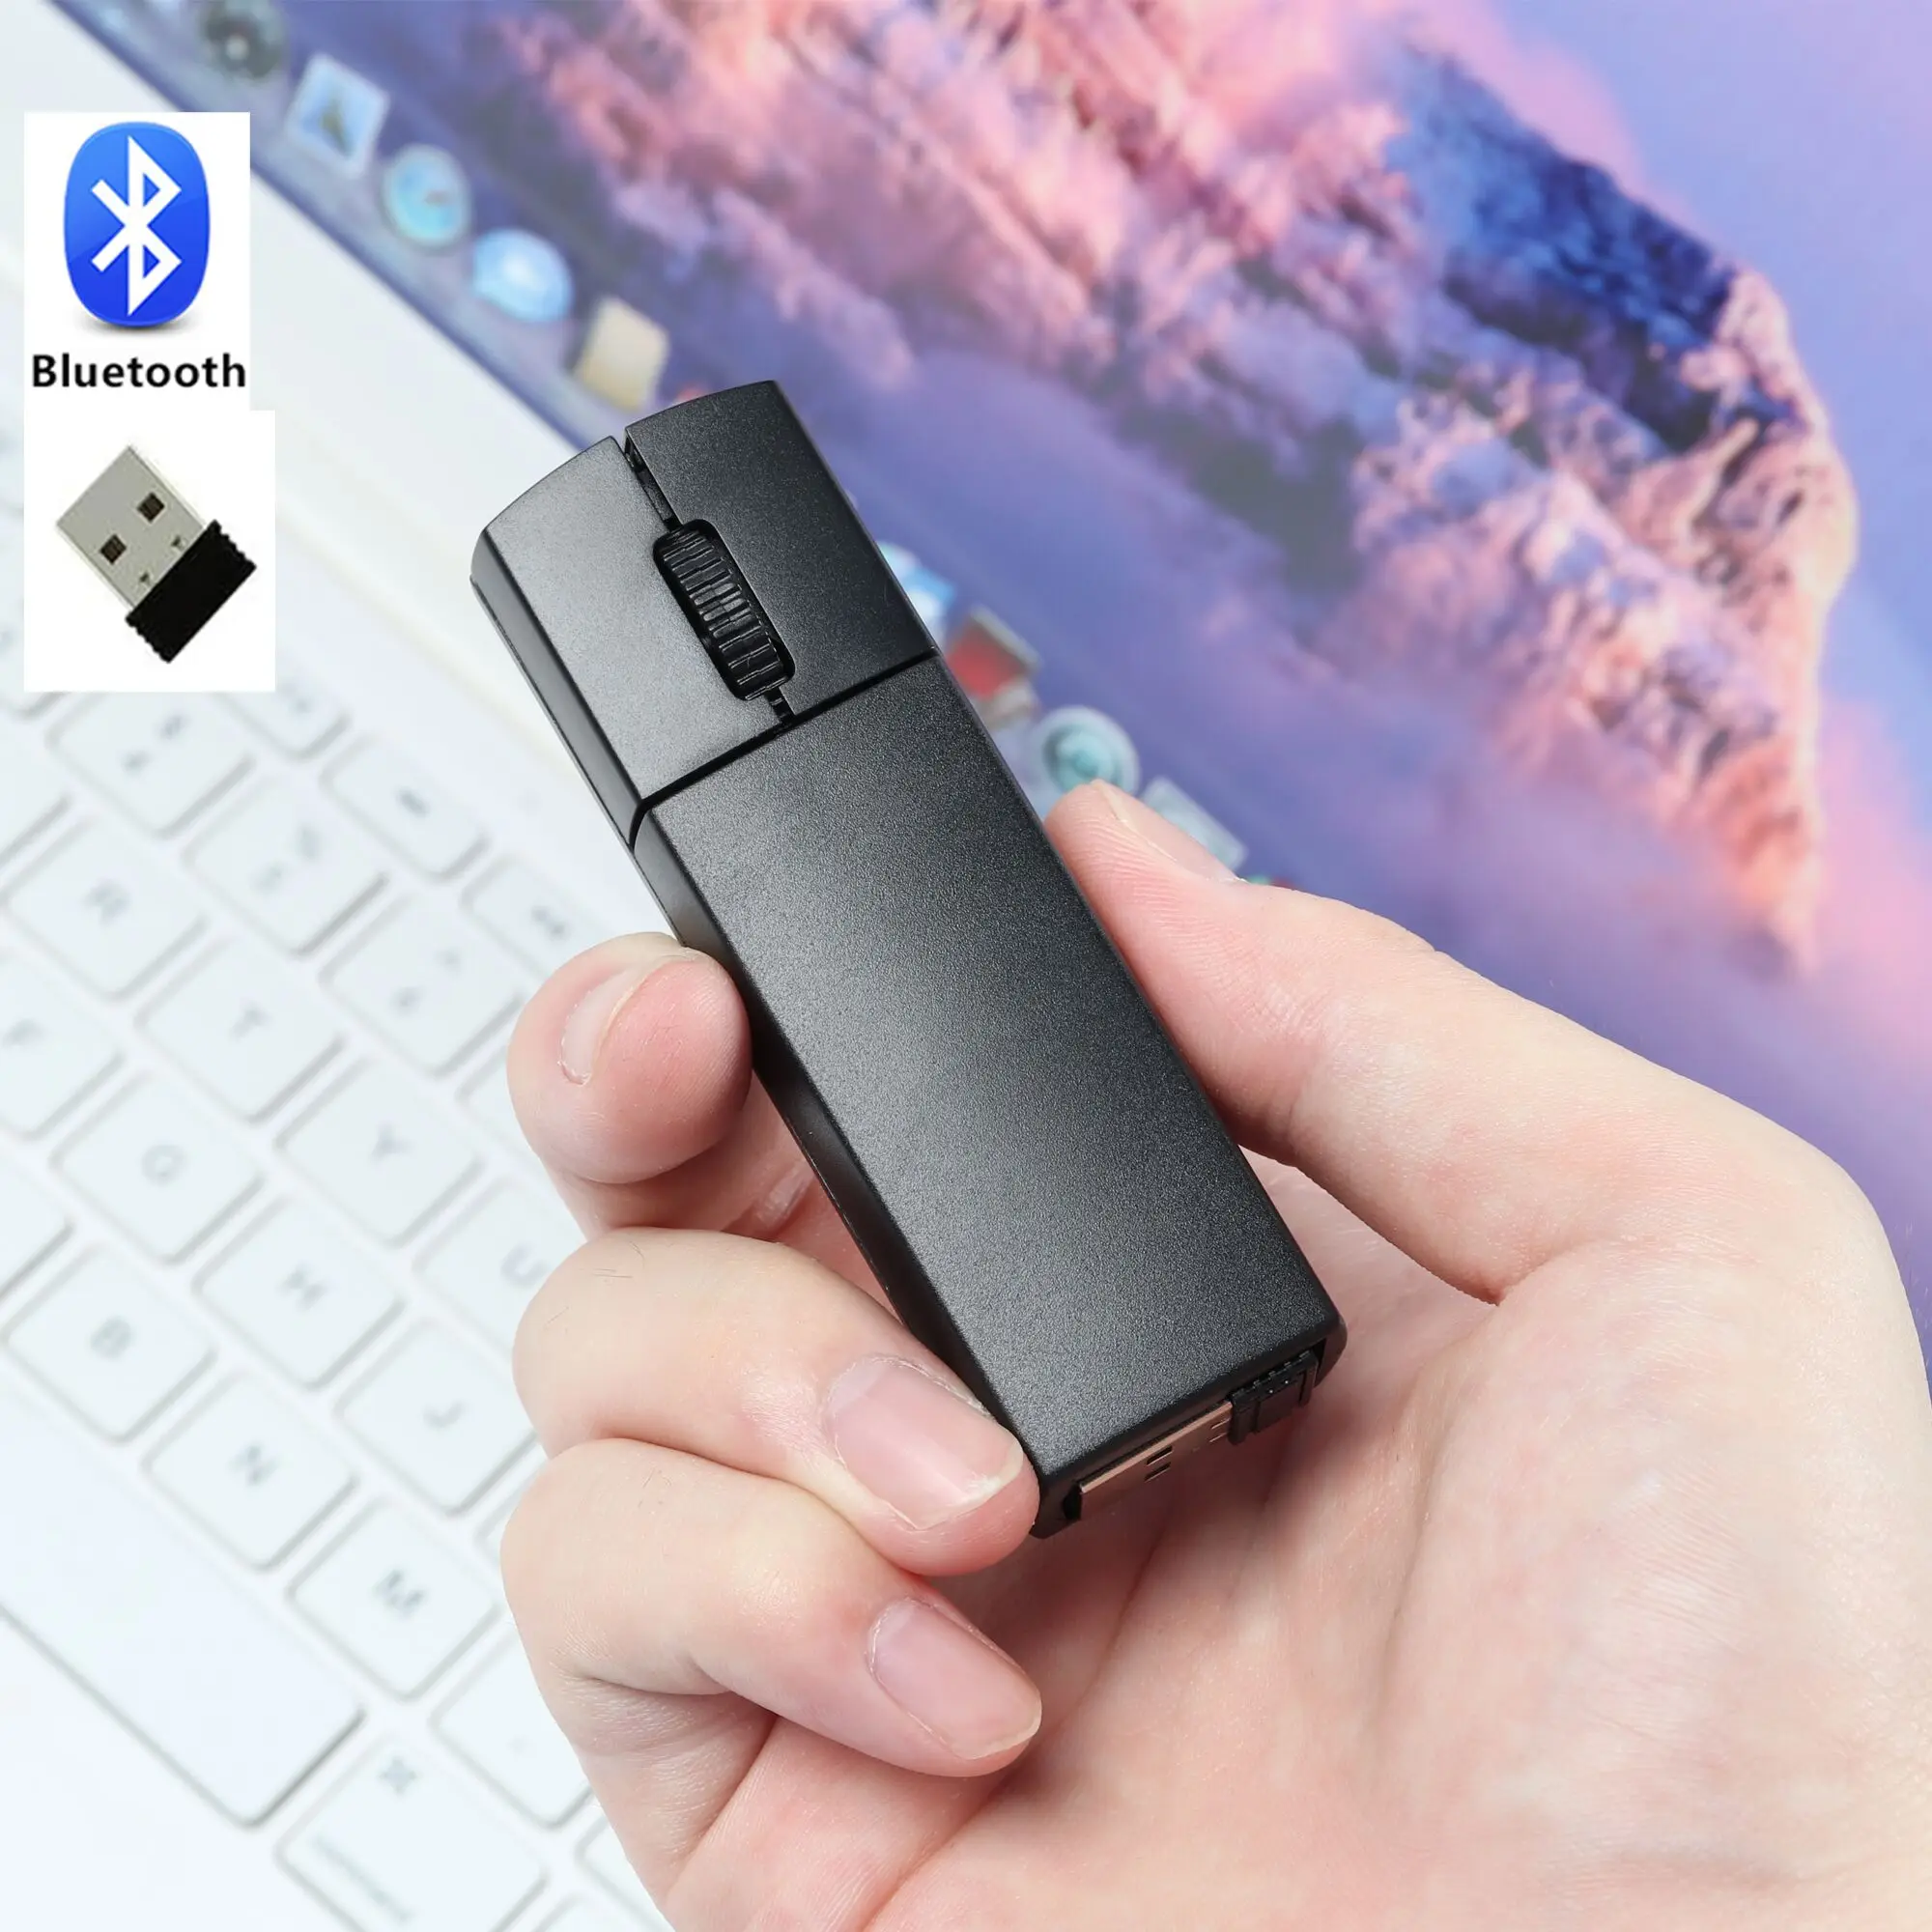 Bluetooth 2.4G Dual-mode Mini Wireless Mouse Mute Pen Mause USB Charging 1200DPI Small Mice Portable For Laptop Computer PC